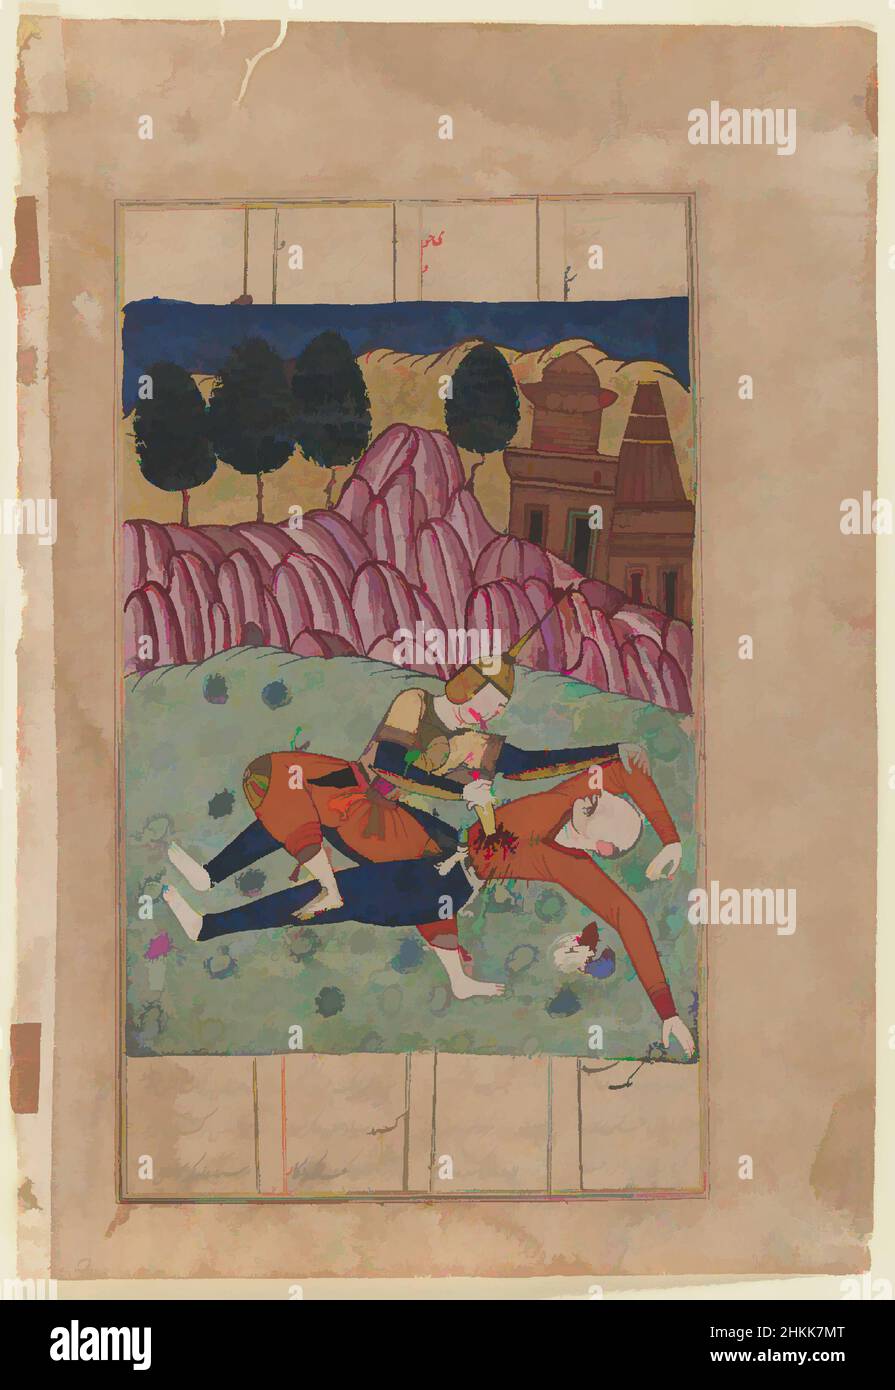 Art inspired by Foroud Slays a Foe, Leaf from a Dispersed Shah-nama Series, Indian, Opaque watercolor and gold on paper, Northern region, India, late 16th century, Mughal, sheet: 10 5/8 x 7 1/4 in., 27.0 x 18.4 cm, 16th century, Foroud, Gold, Indian, Leaf, Manuscript, Mughal School, Classic works modernized by Artotop with a splash of modernity. Shapes, color and value, eye-catching visual impact on art. Emotions through freedom of artworks in a contemporary way. A timeless message pursuing a wildly creative new direction. Artists turning to the digital medium and creating the Artotop NFT Stock Photo